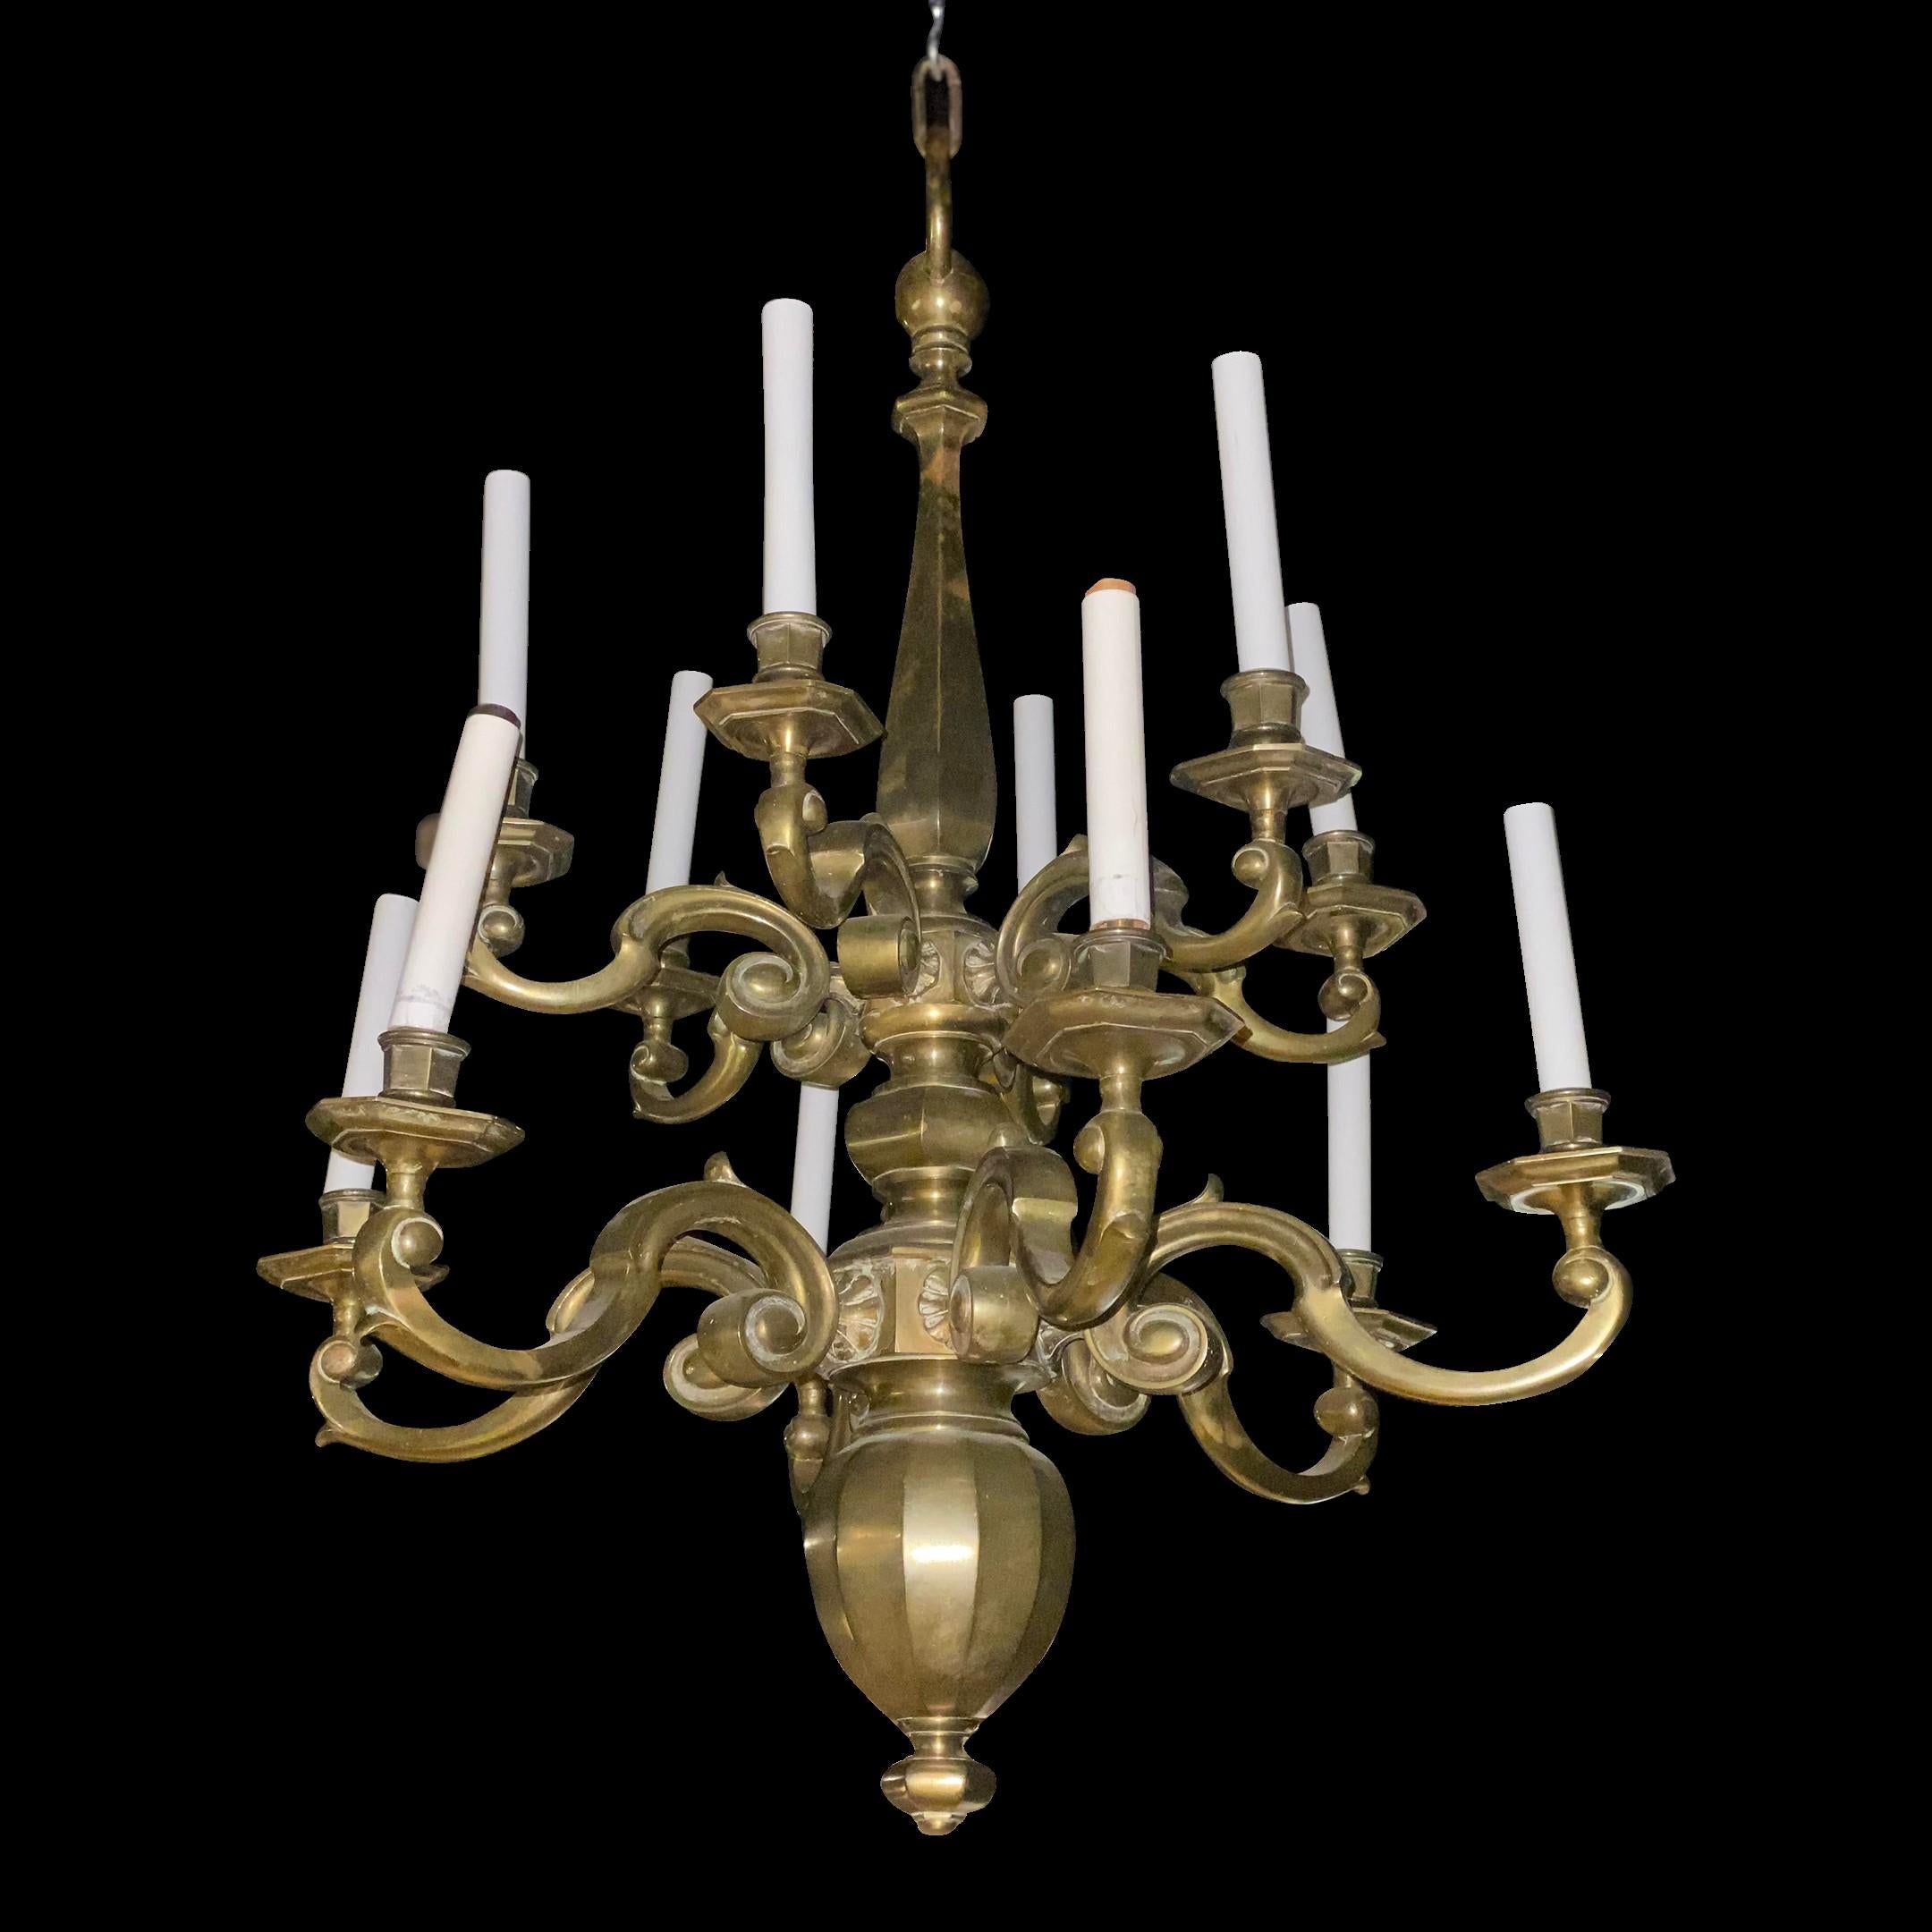 A circa 1900's double tiers bronze chandelier with 12 lights. Original finish and patina